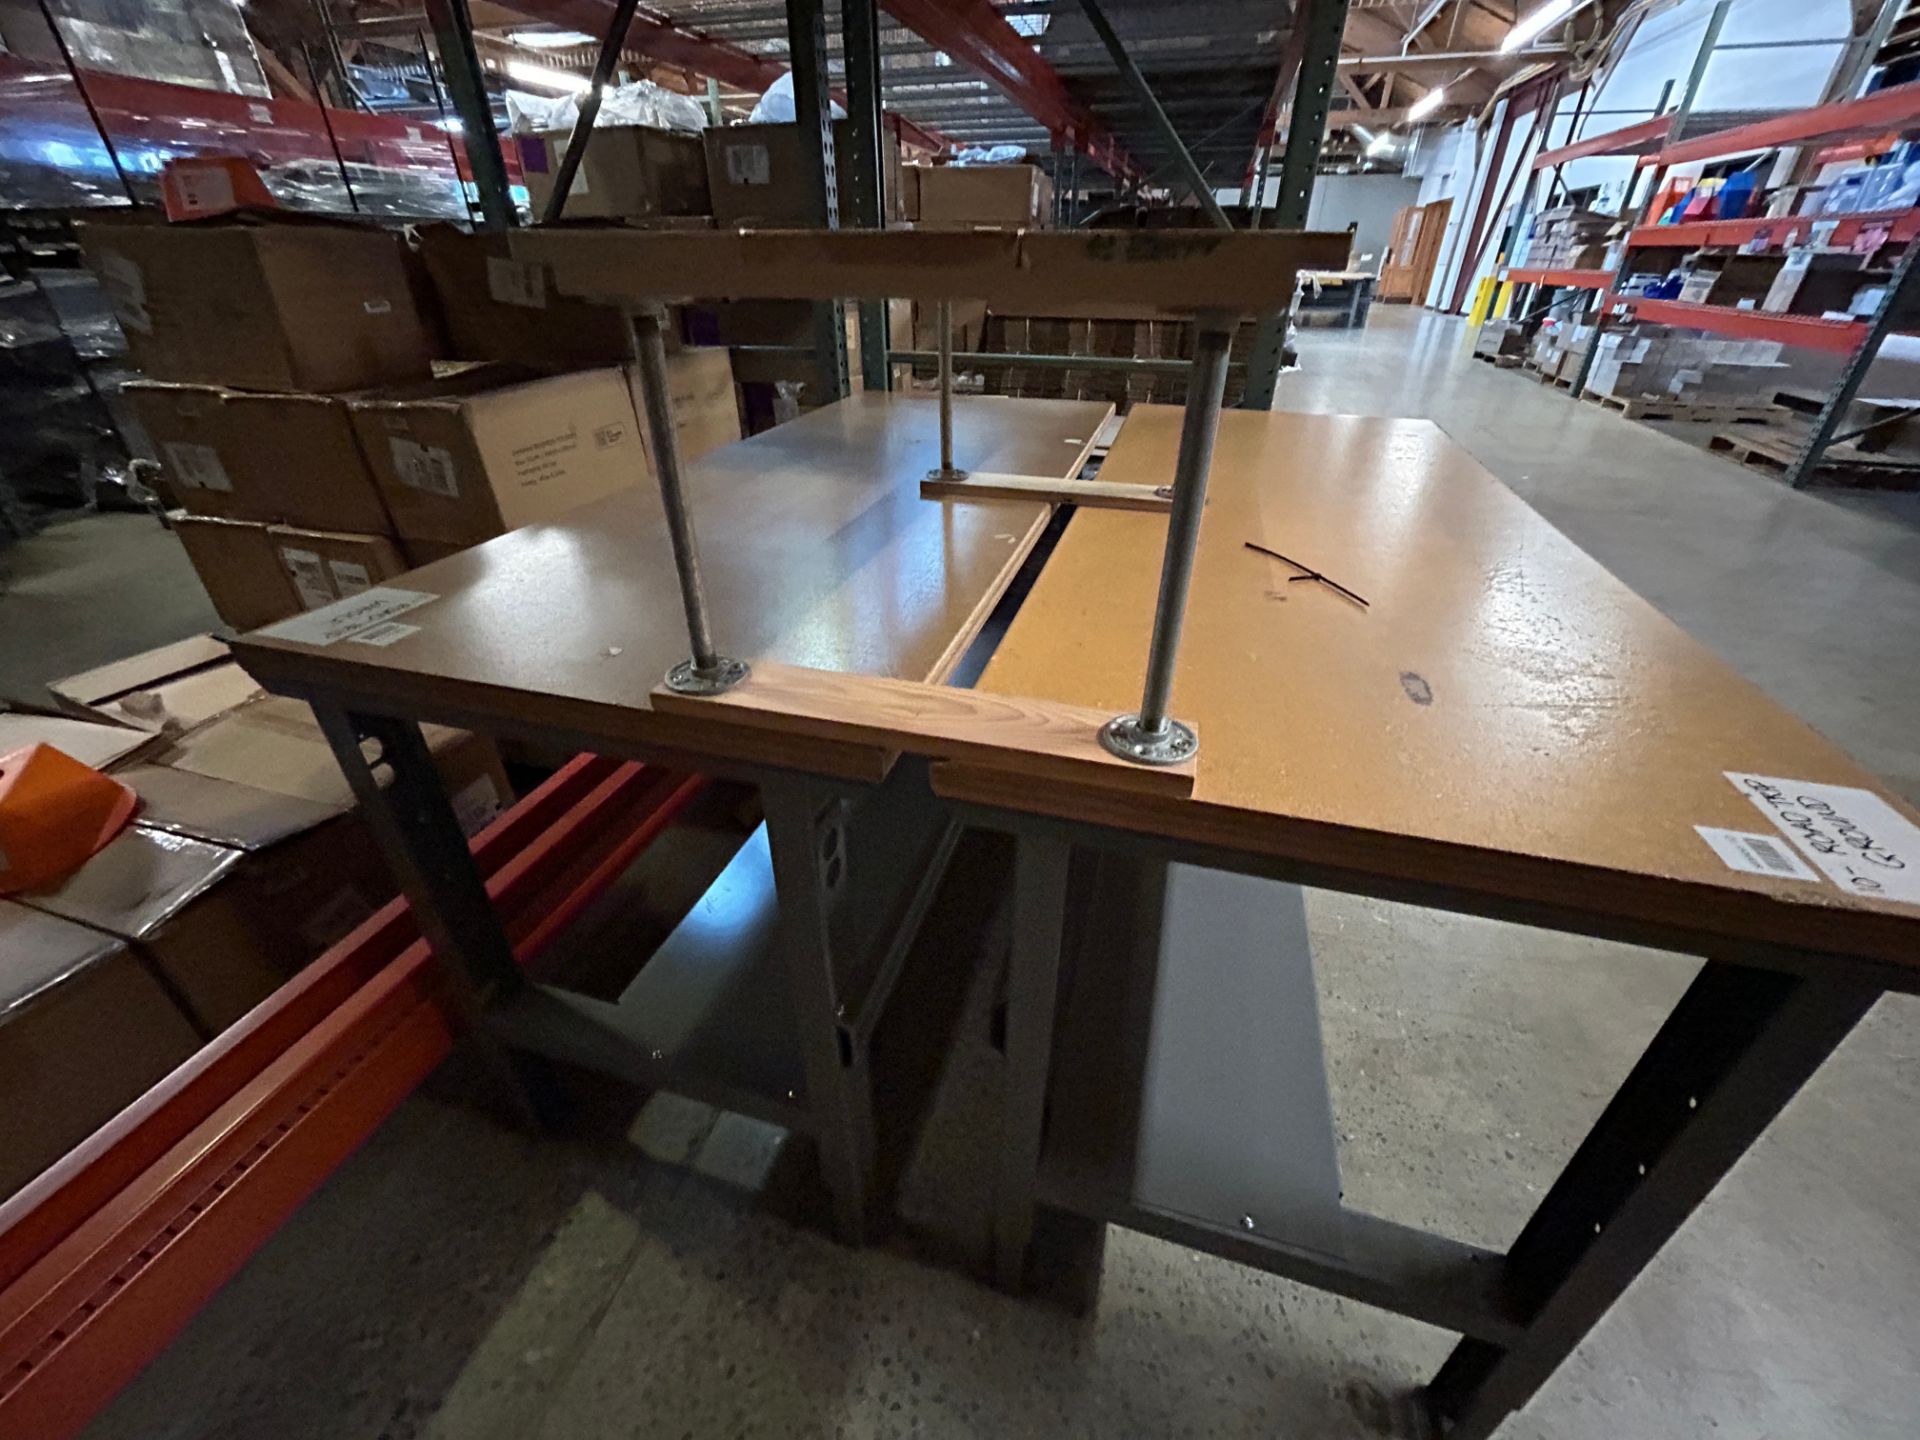 Lot (2) Steel-Based Tables, with Wood Tops 5 5 ft. X 3 Ft. (1) Small Desktop - Image 4 of 4